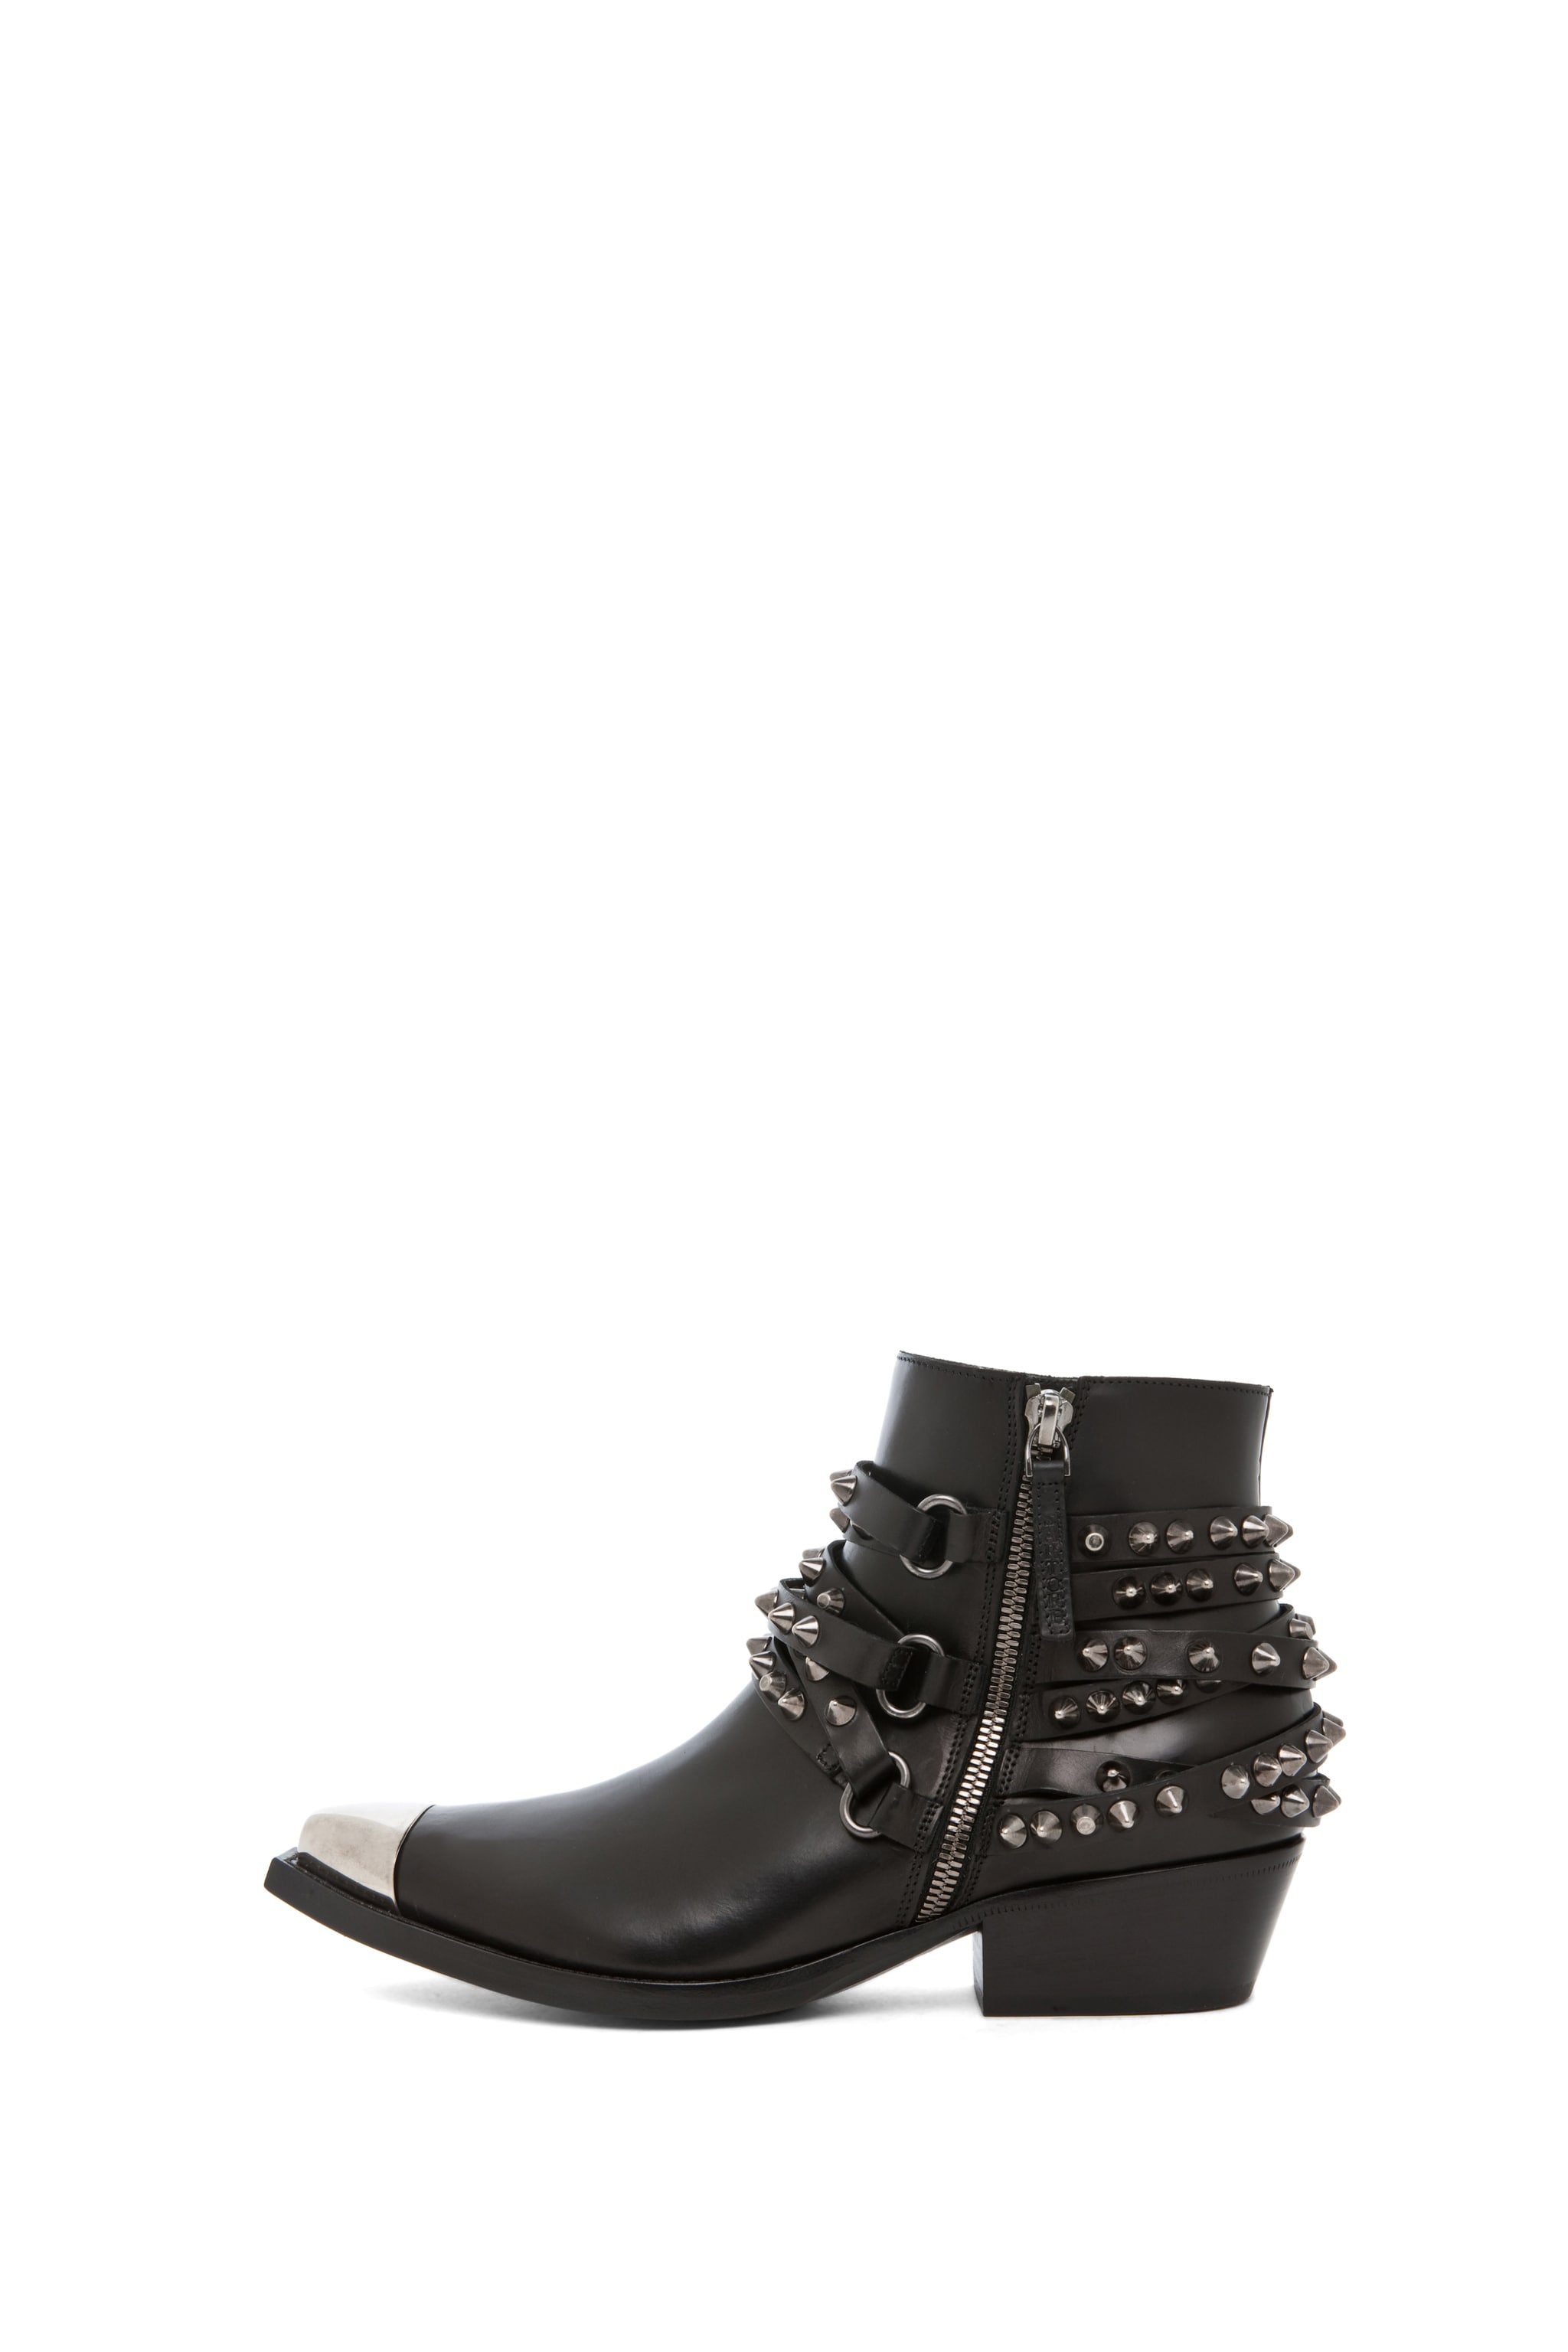 Image 1 of Sartore Parma Bootie with Studs in Plain Black